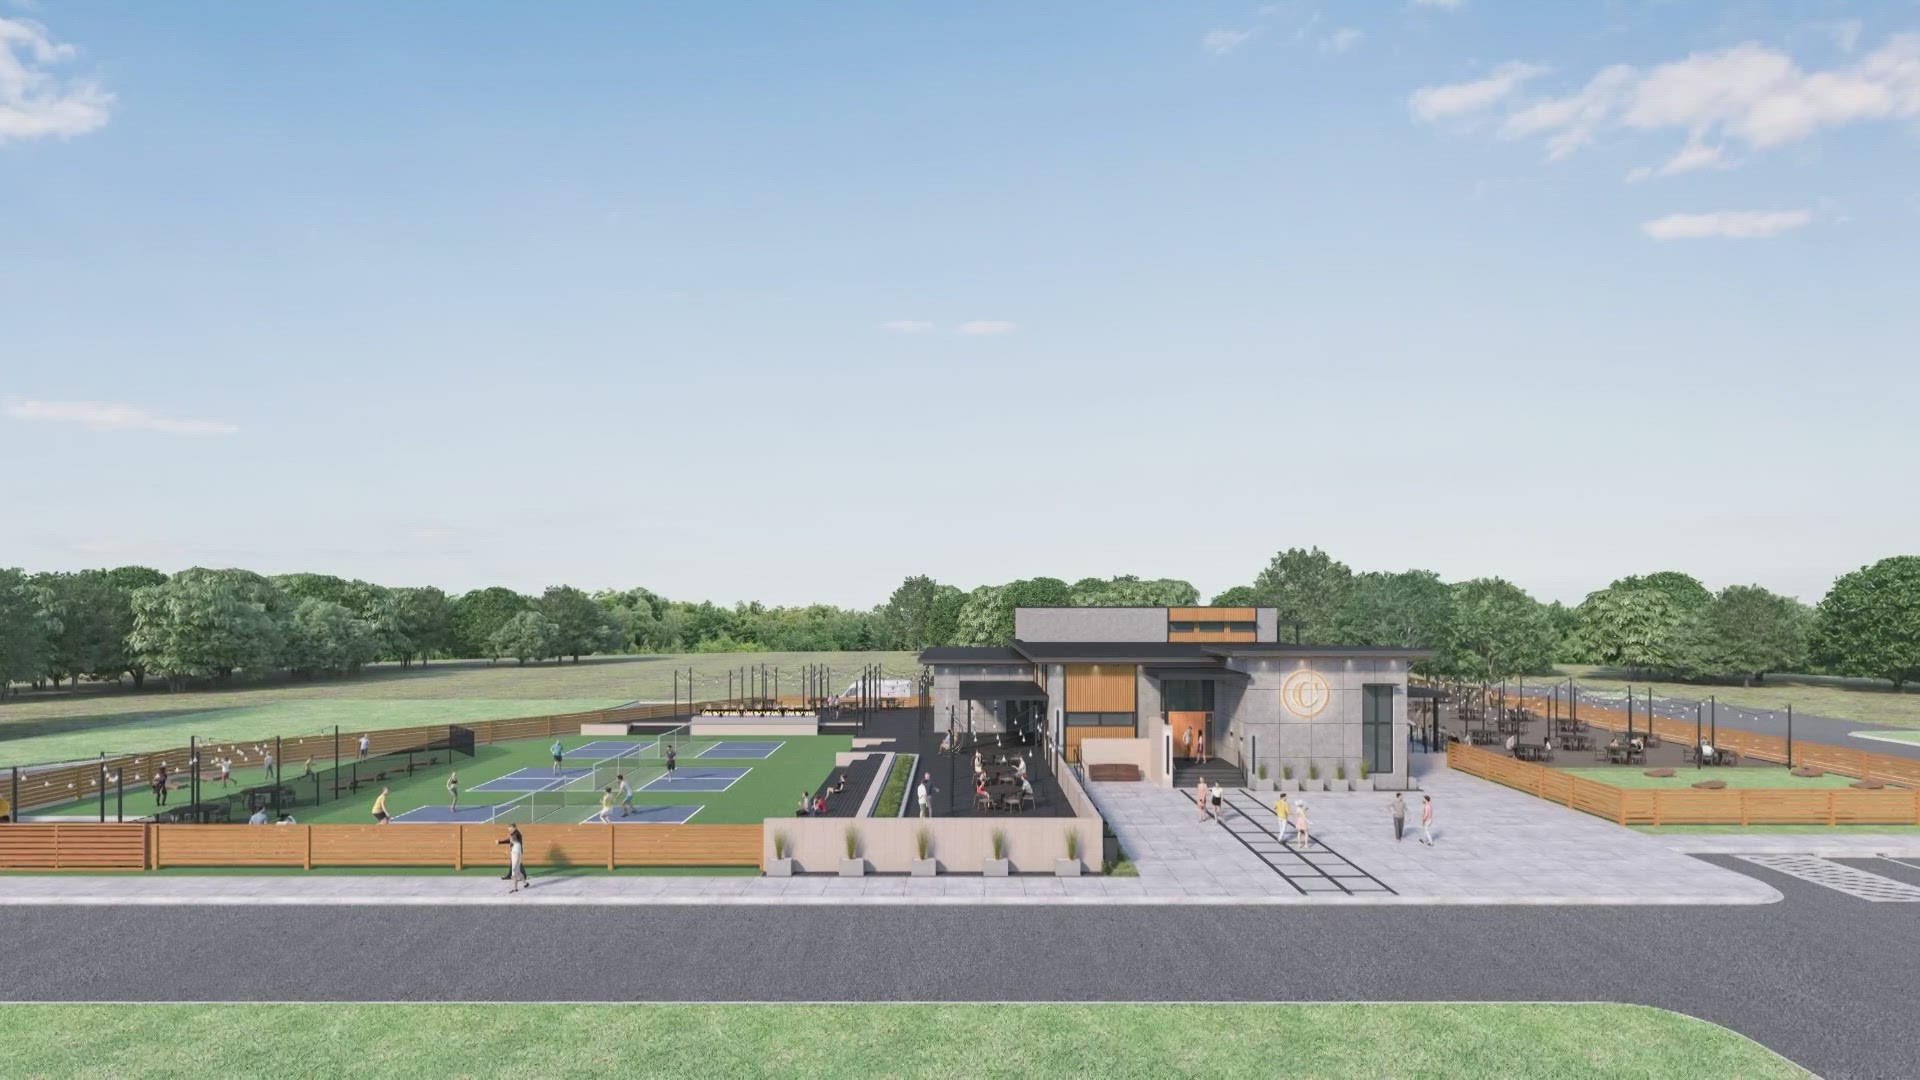 Commonwealth Texas will feature a restaurant and bourbon bar, as well as an area for live music, pickleball, cornhole, and multiple spaces for events or gatherings.